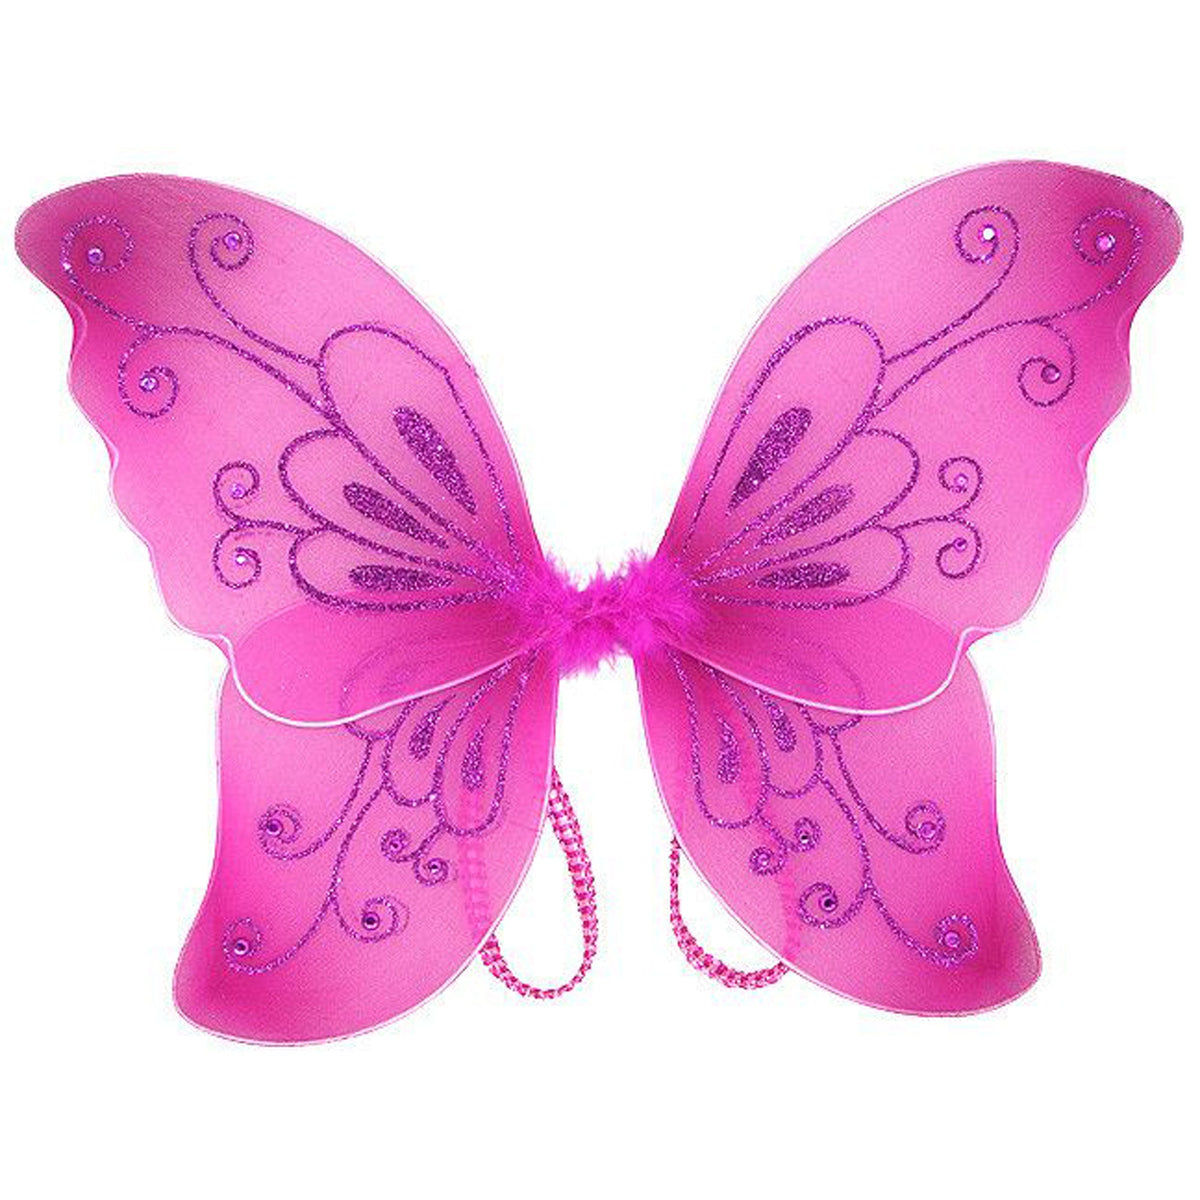 IVY TRADING INC. Costume Accessories Fuchsia Butterfly Wings and Wand for Adults 8336572982133